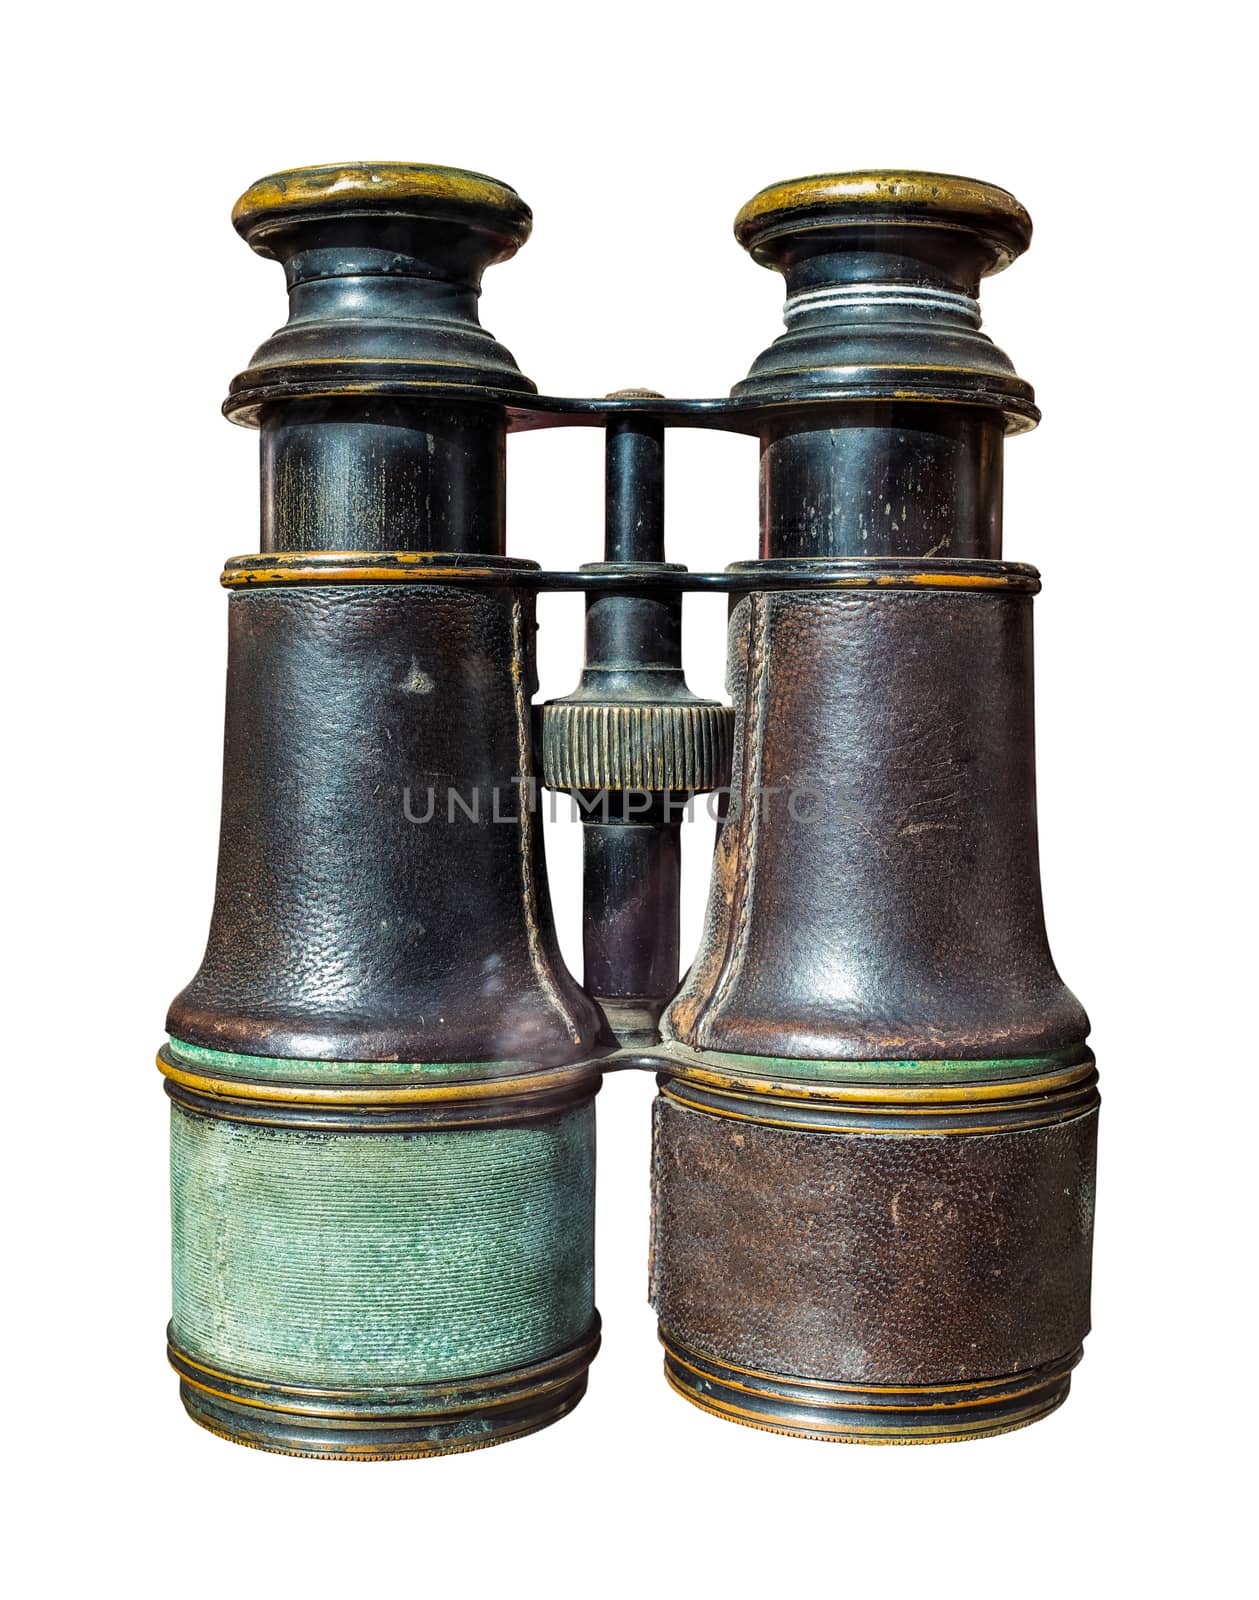 A Pair Of Isolated Vintage Brass Wartime Binoculars